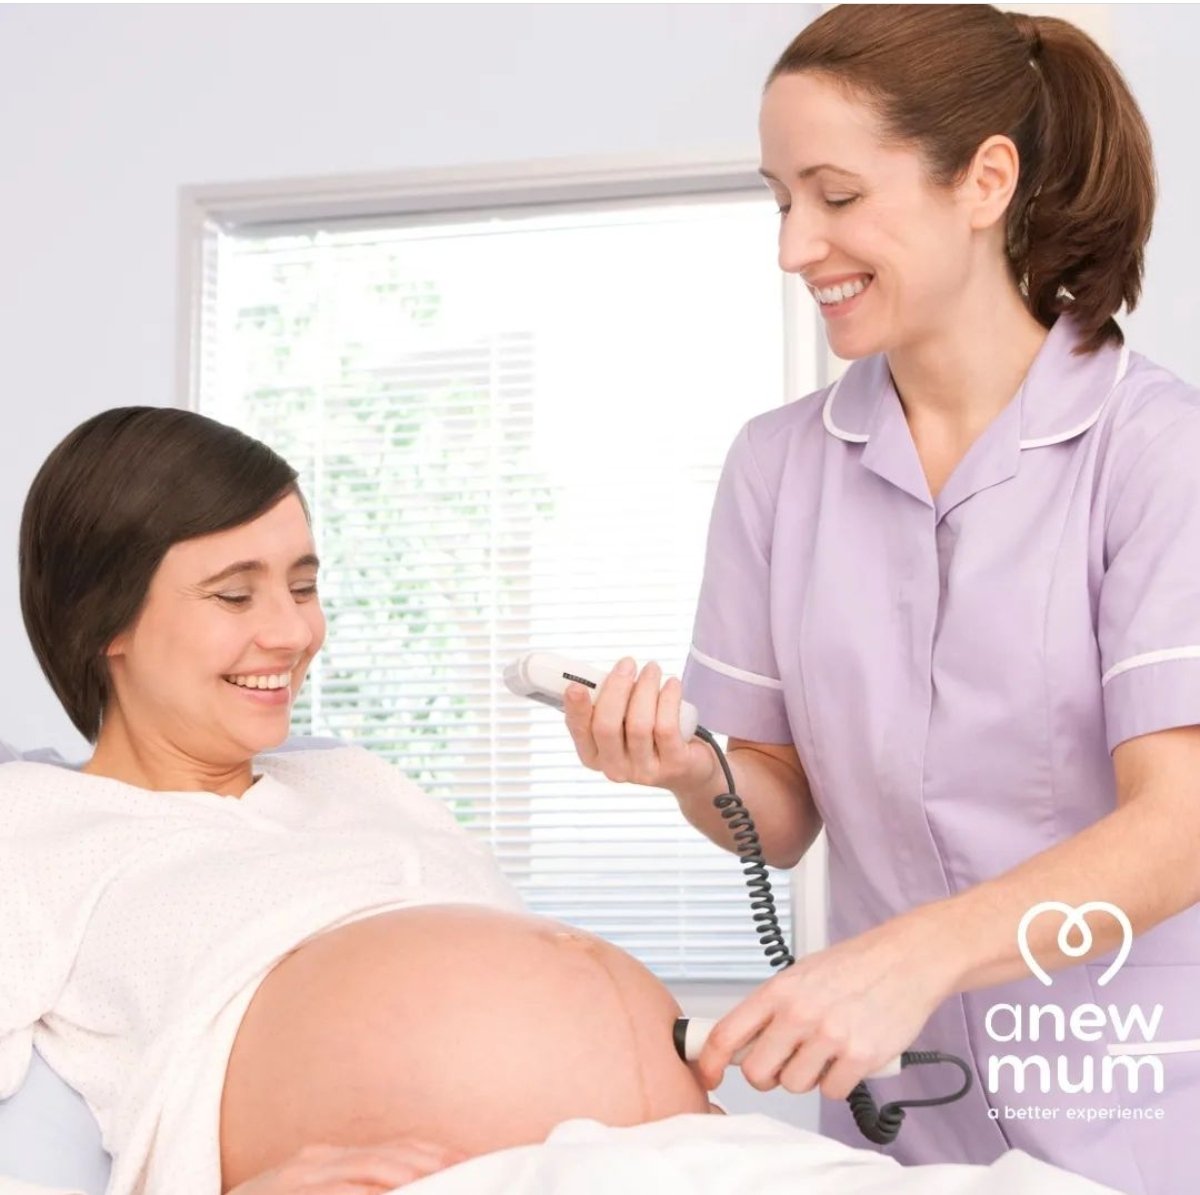 International Day of the Midwife is celebrated each year on 5 May. This is a chance for midwives to celebrate their profession and for all of us to recognise their work and contribution to maternal and newborn health. #thankyou #midwife #midwifery #internationaldayofthemidwife